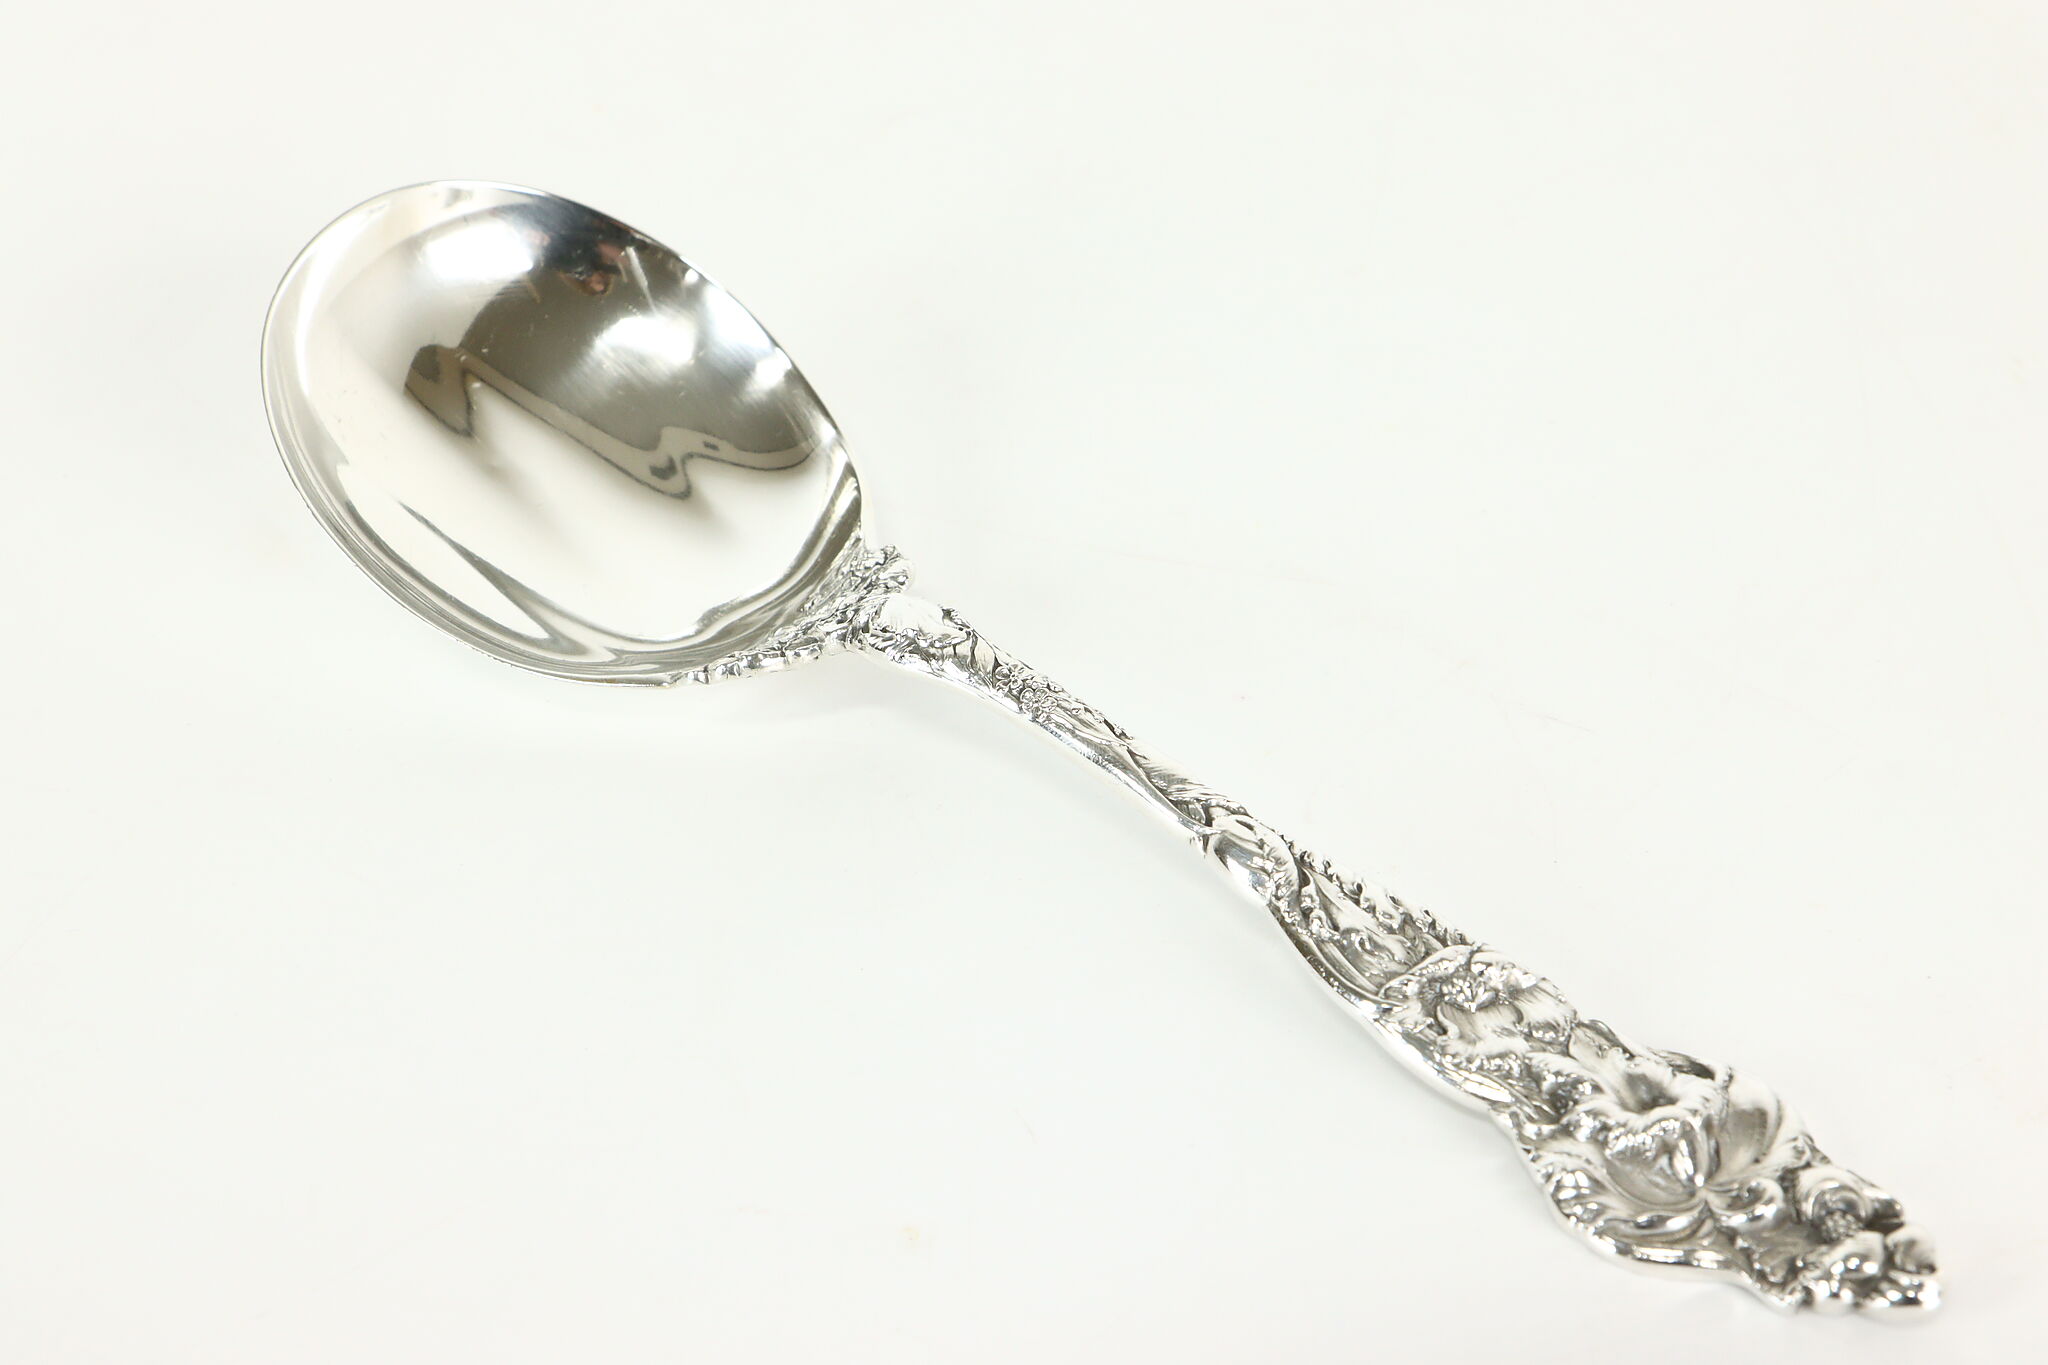 Ornate Silver Teaspoons, Four Spoons with Floral Handles, Arranged in a  Fan-like Manner and Connected